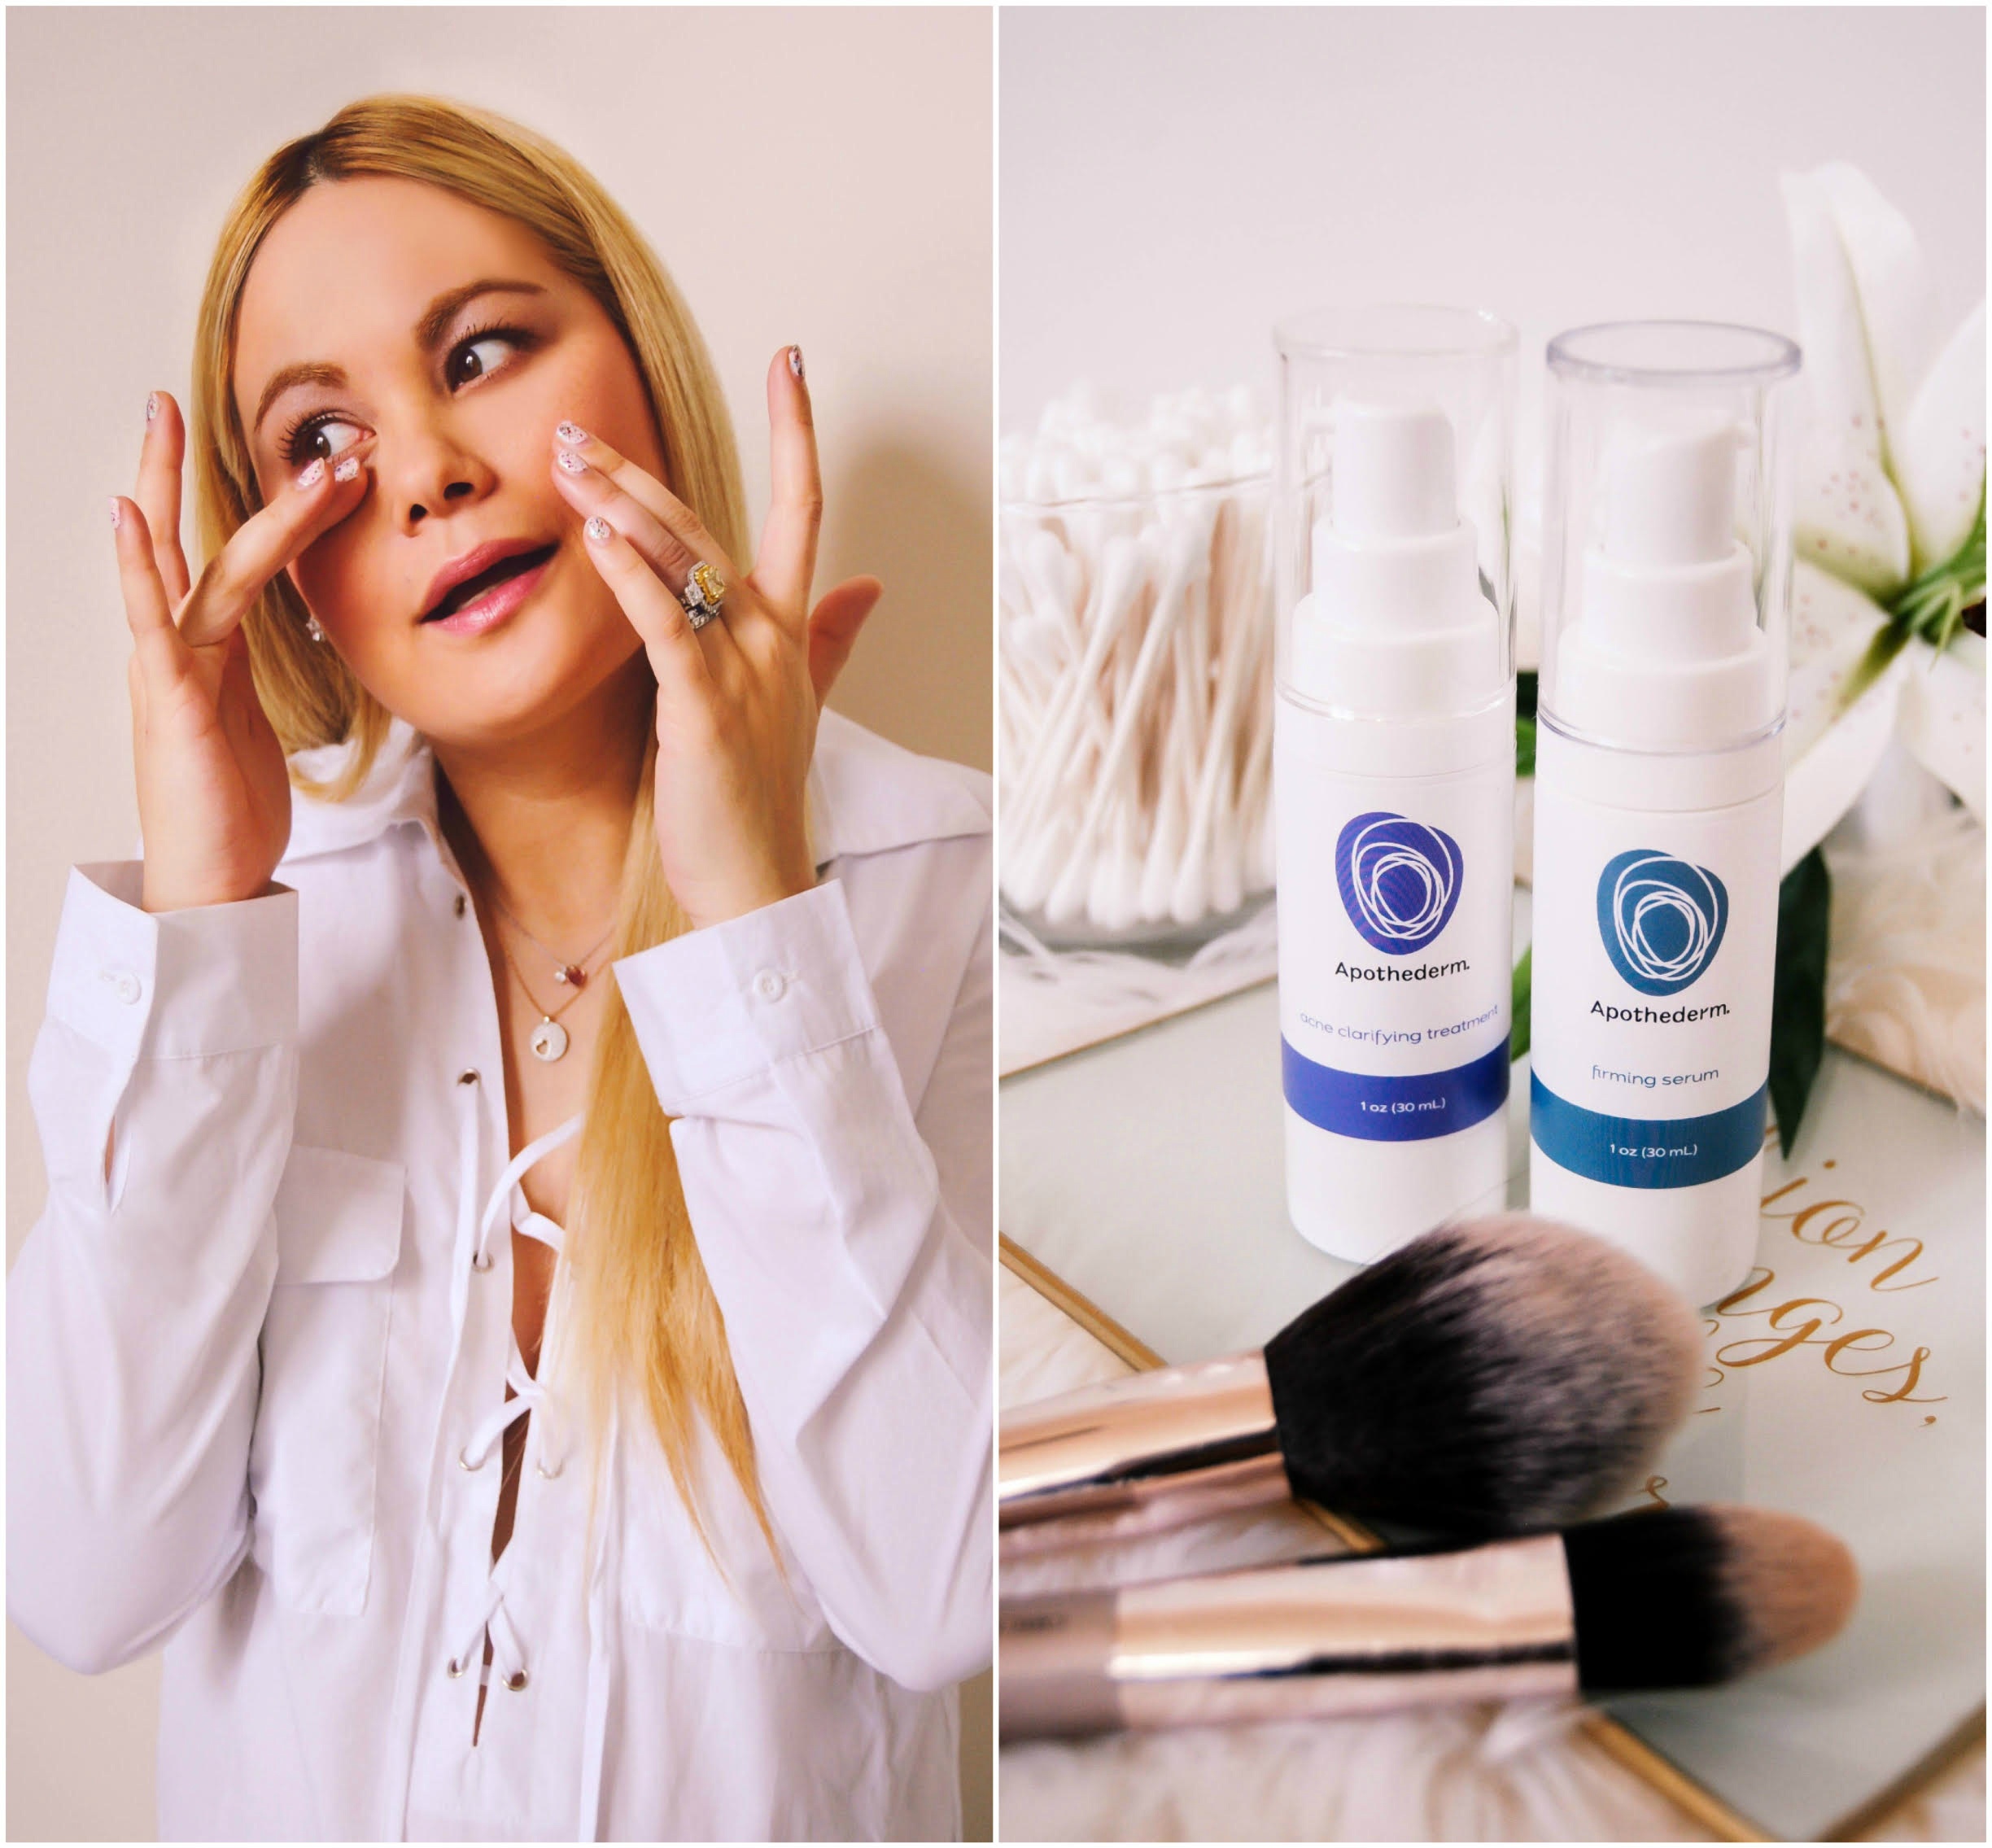 vanessa-lambert-blogger-behind-what-would-v-wear-shares-her-skin-beauty-routine-with-apothederm_5